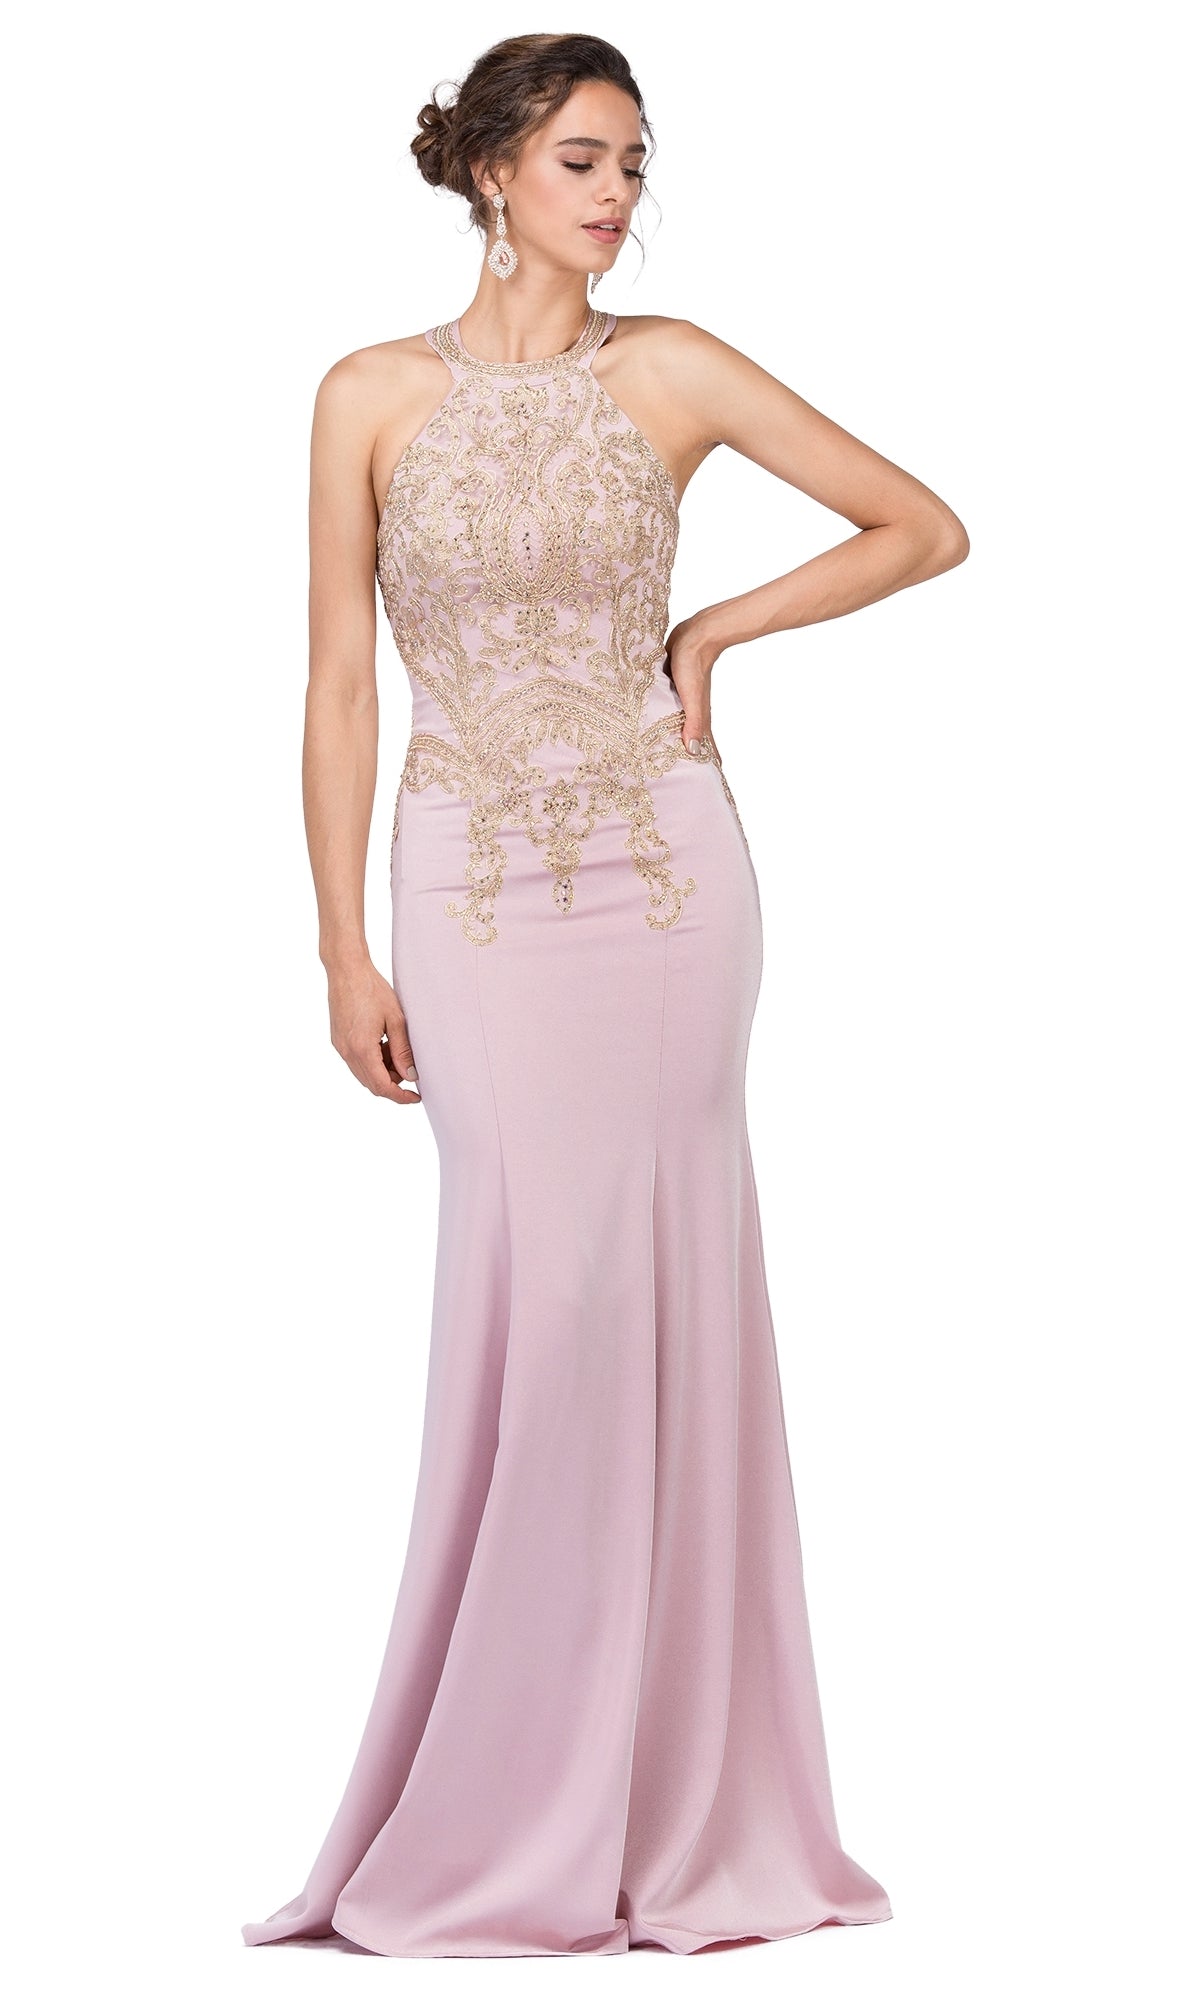 Beaded High-Neck Prom Dress with T-Back